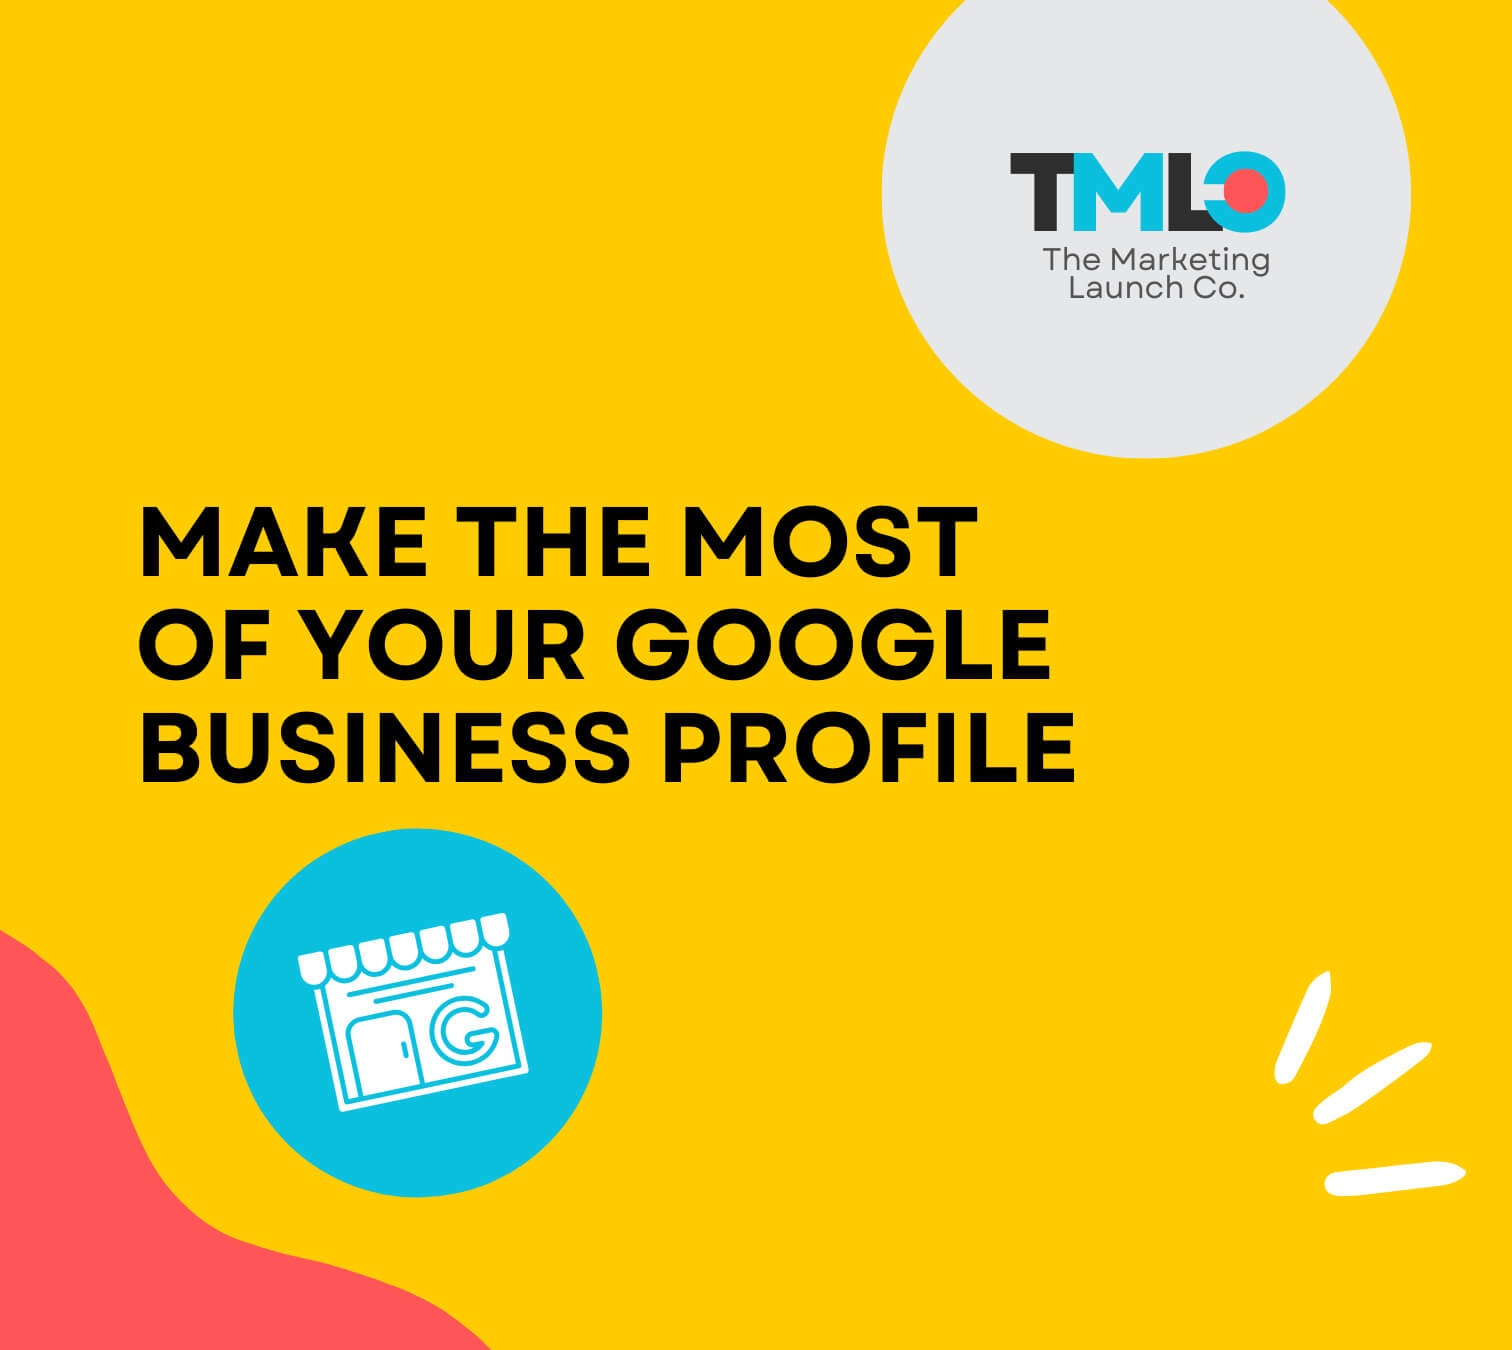 10 steps to a better Google Business profile